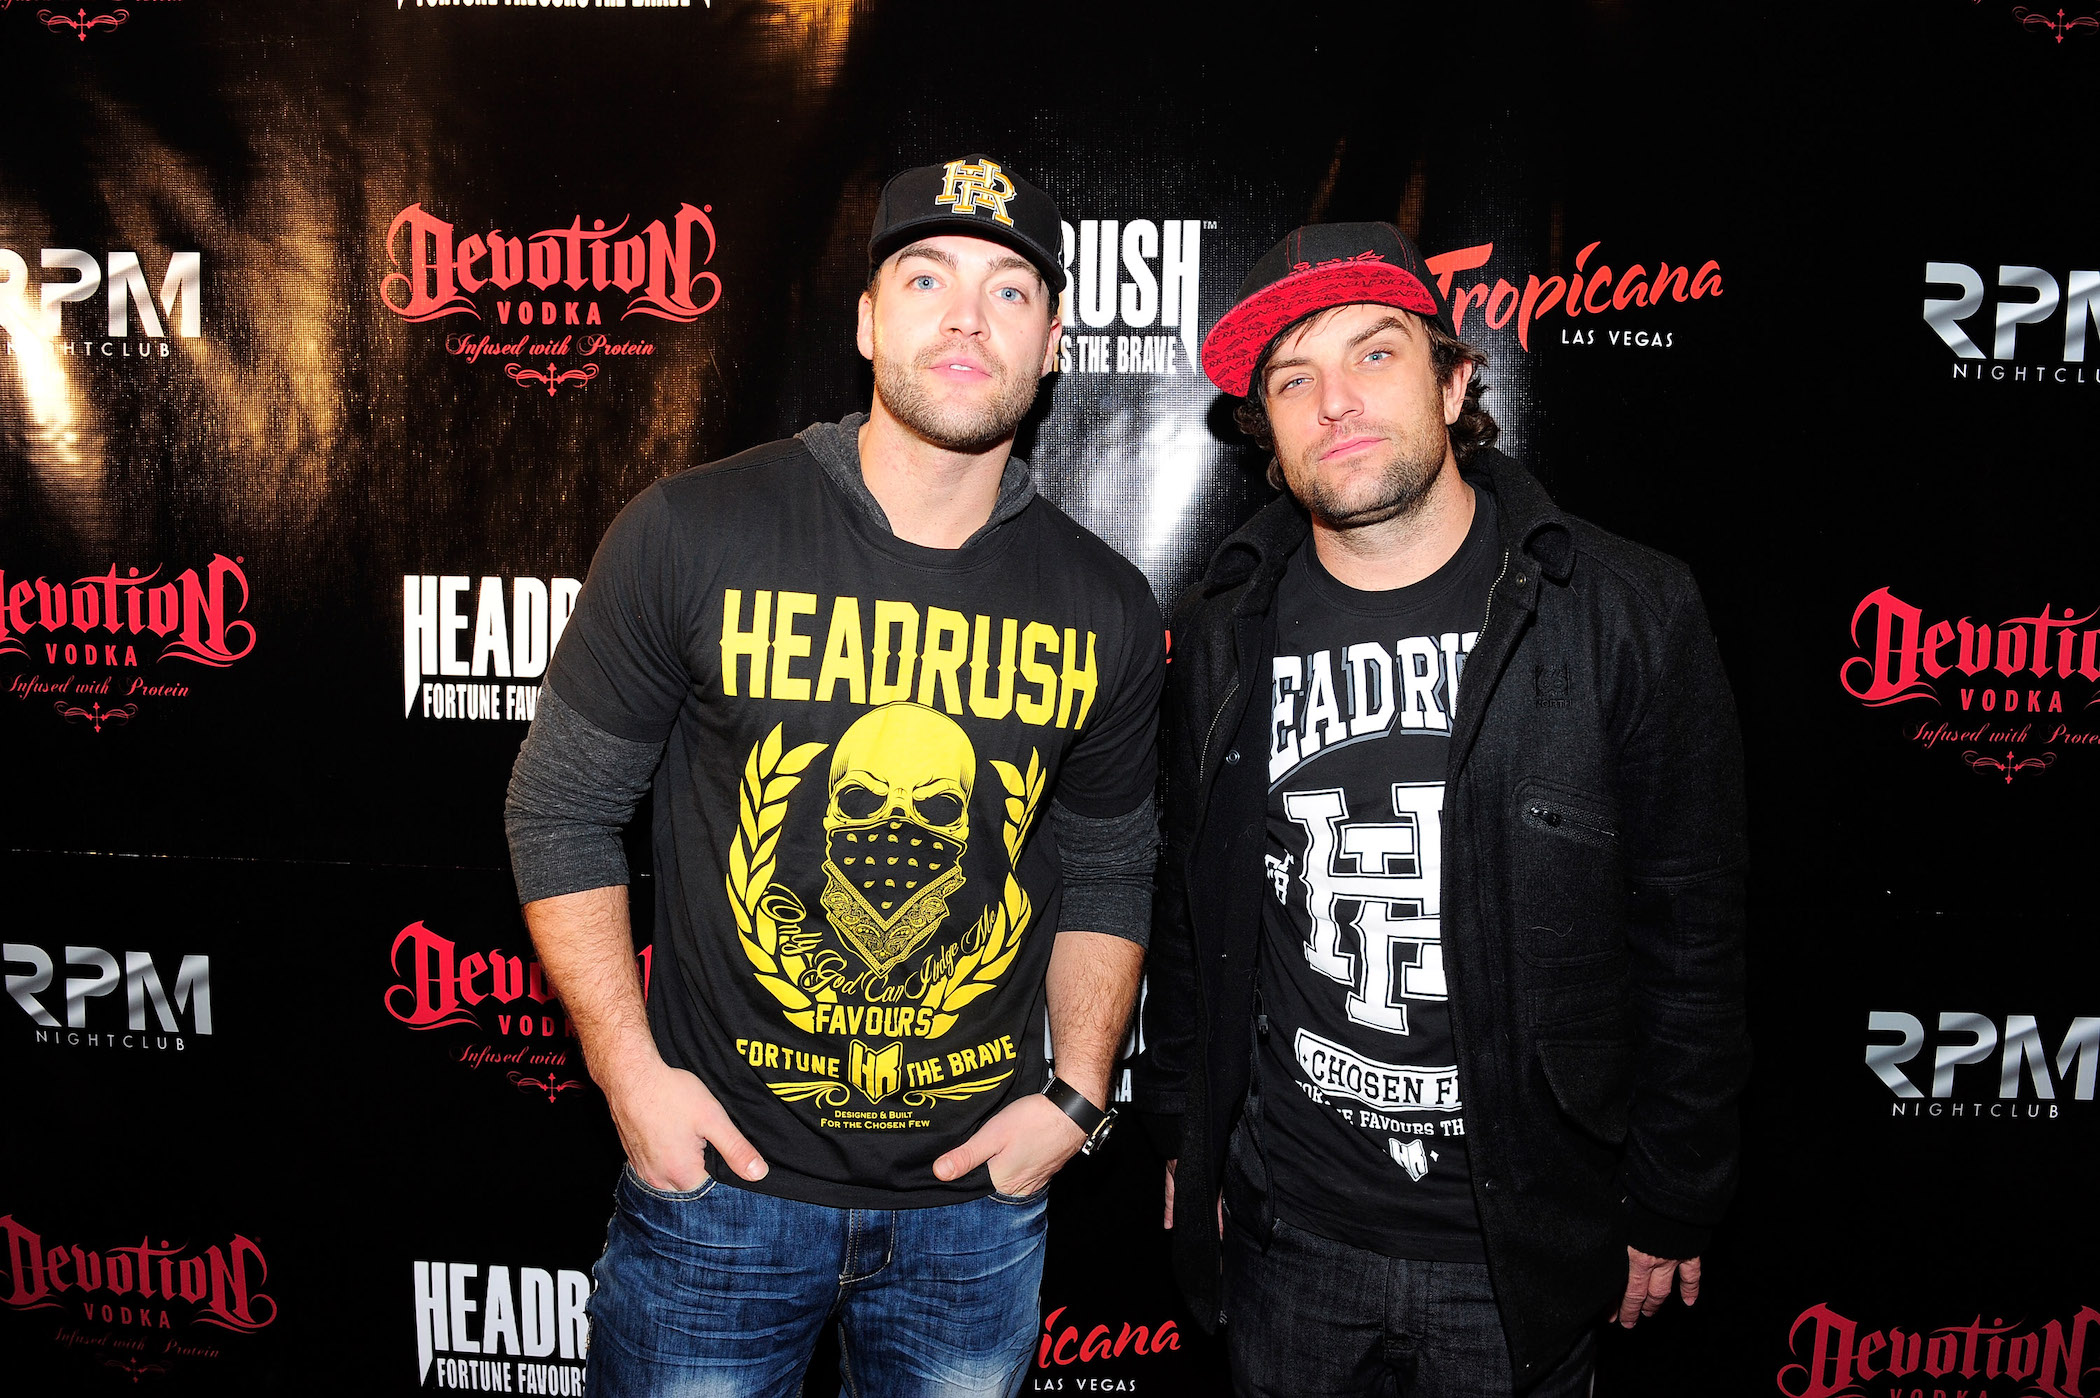 CT Tamburello from MTV's 'The Challenge' Season 37 cast and host TJ Lavin standing together